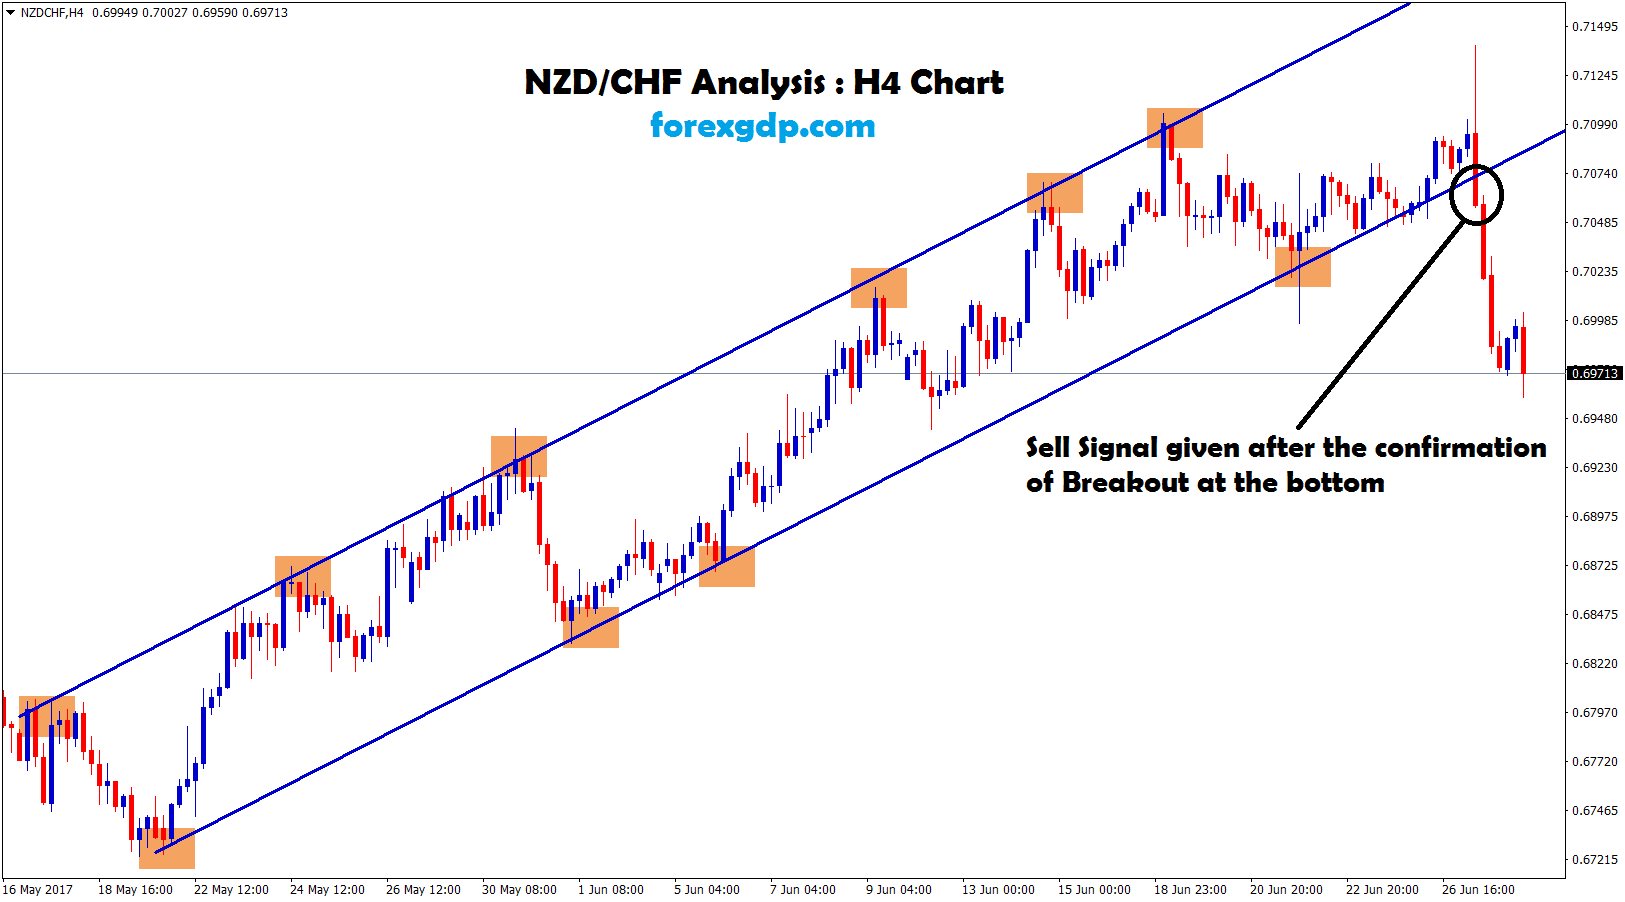 ascending channel breakout at bottom in nzdchf h4 chart